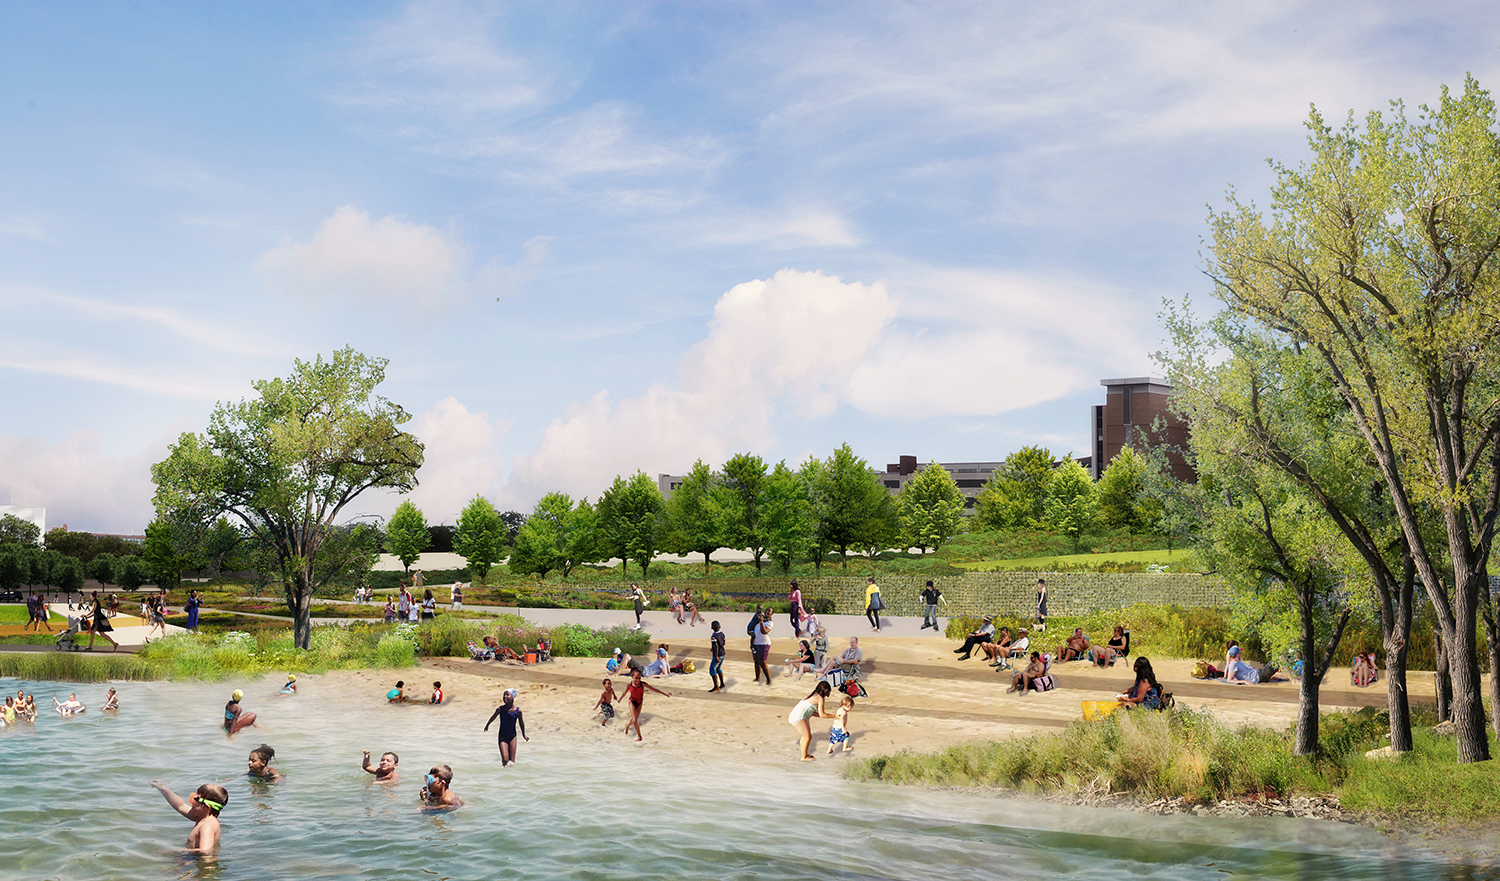 The "riverbank" and "may's creek beach" provide equitable access to the river for all Detroiters and connects to Detroit's International Riverwalk. 